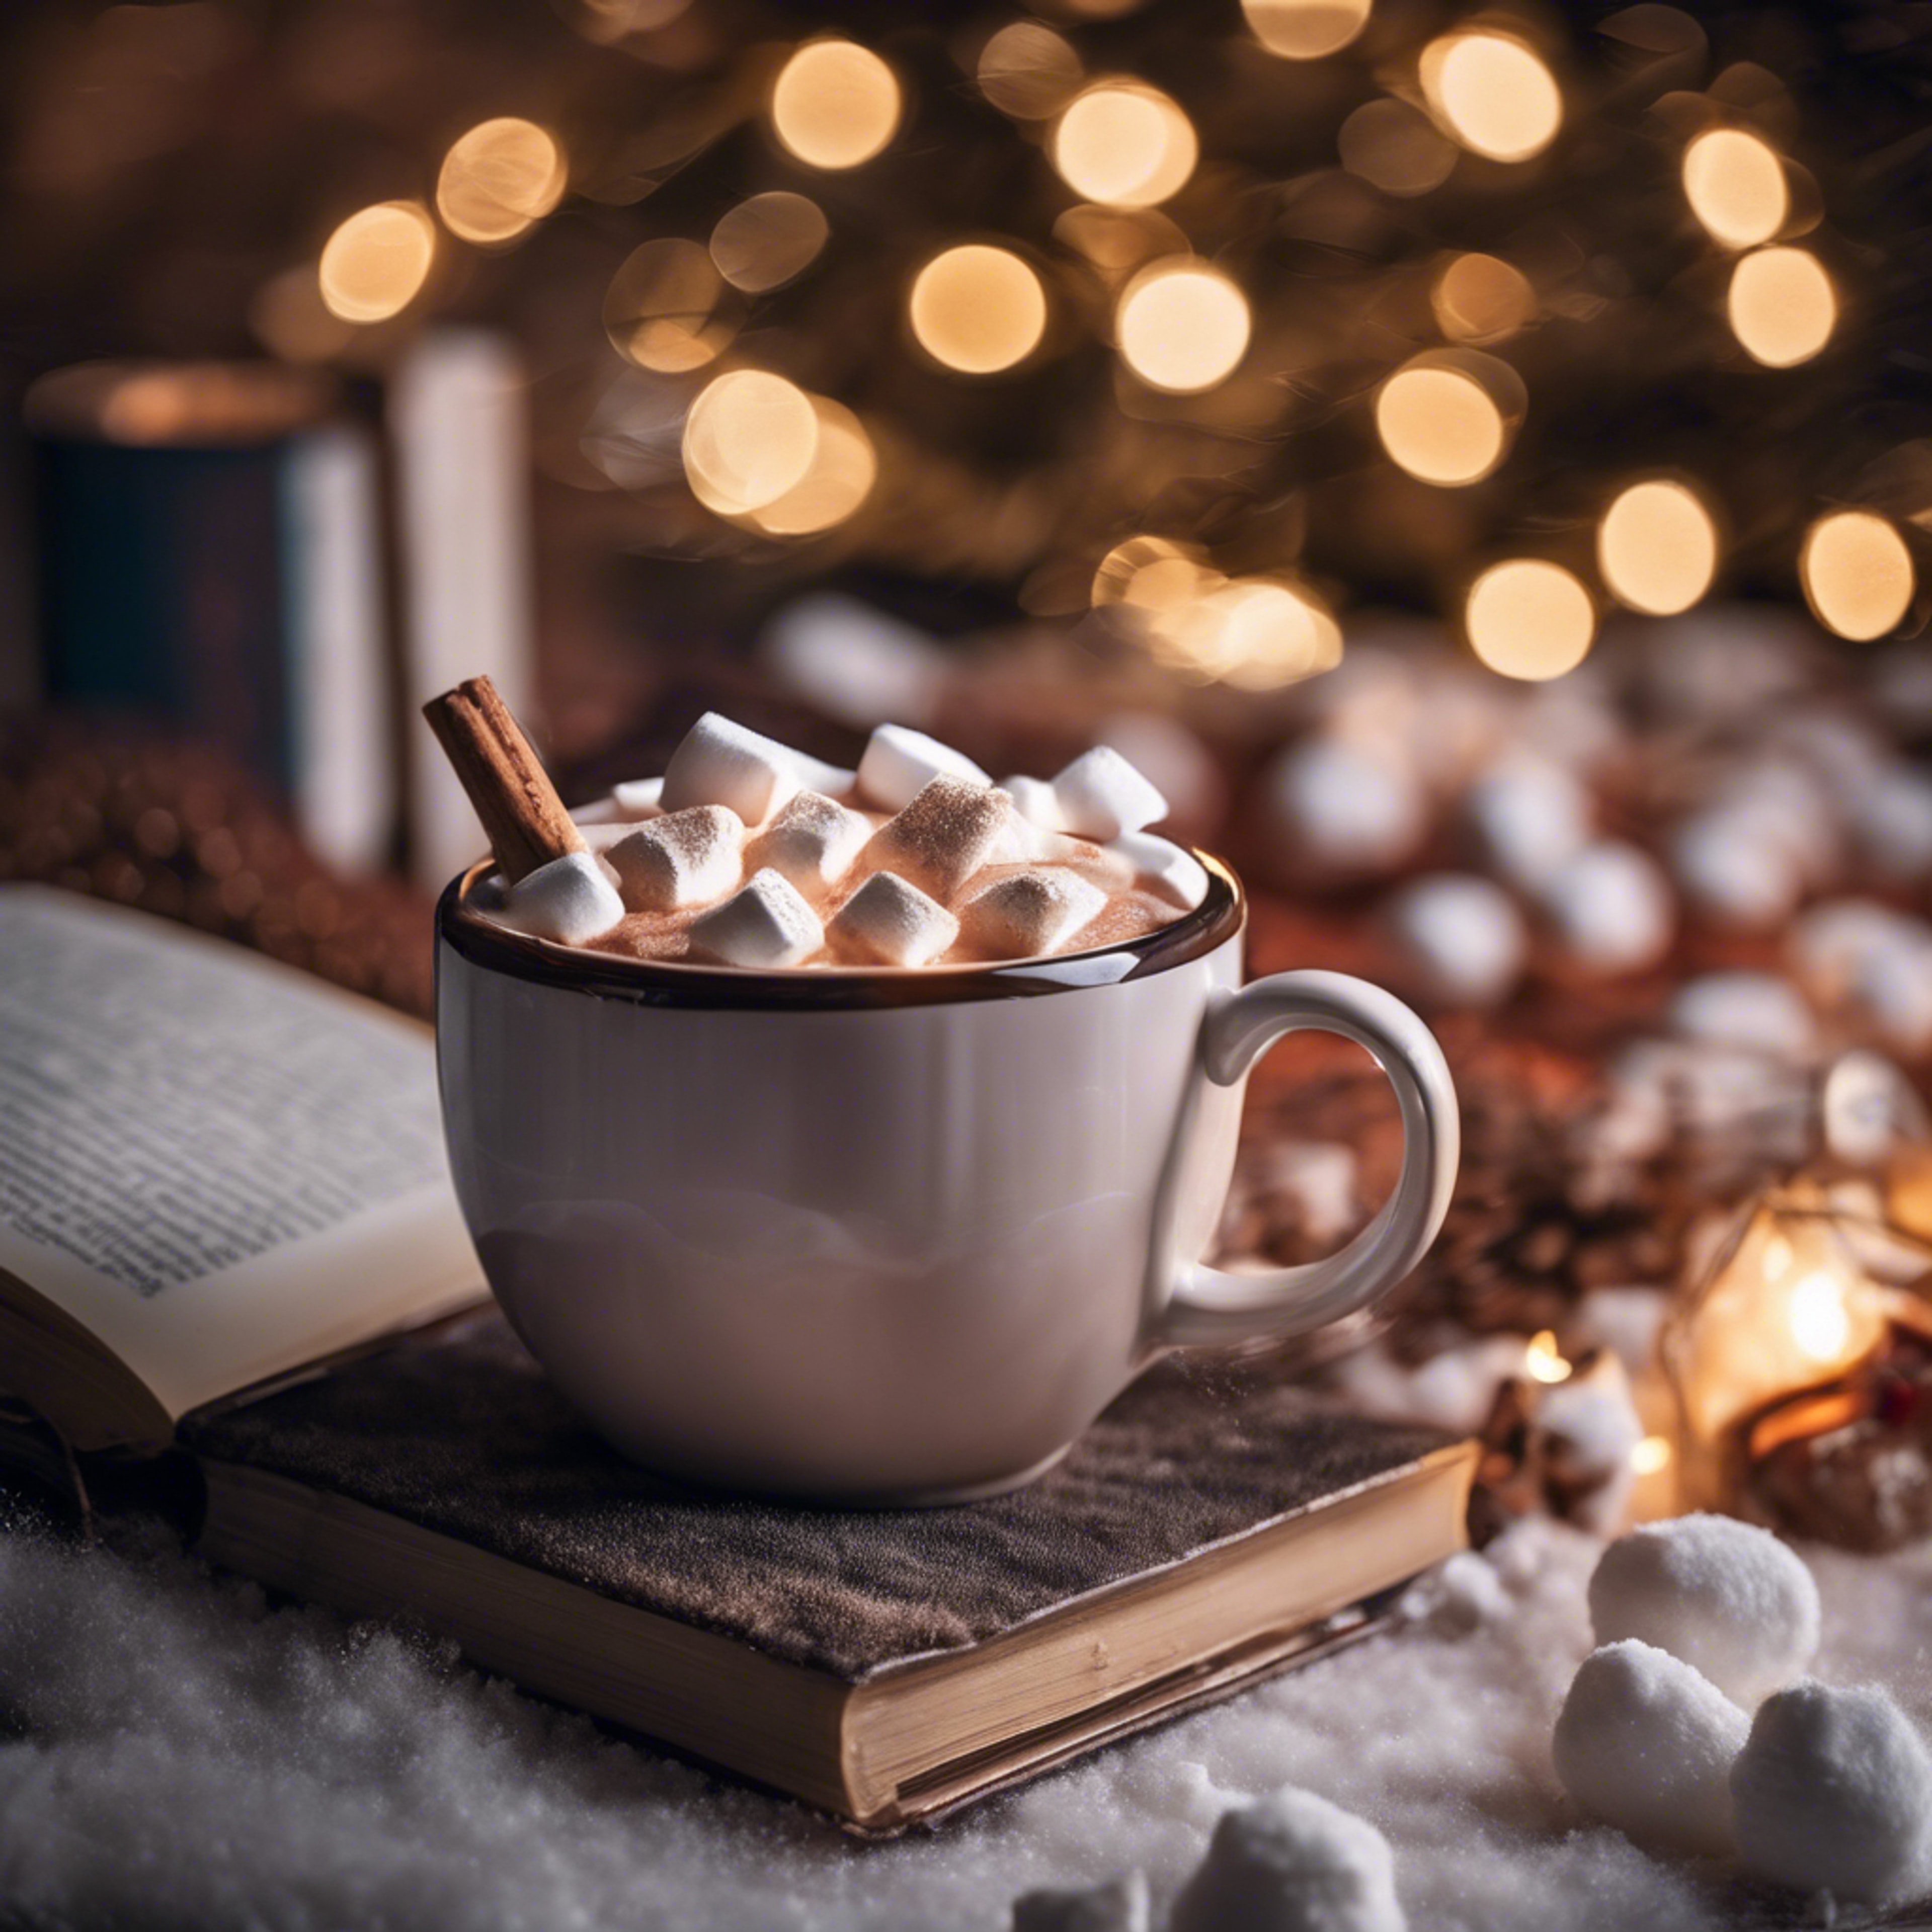 A steaming mug of hot cocoa topped with marshmallows, paired with a good book on a winter night.壁紙[bb1918feb58c4b029e23]